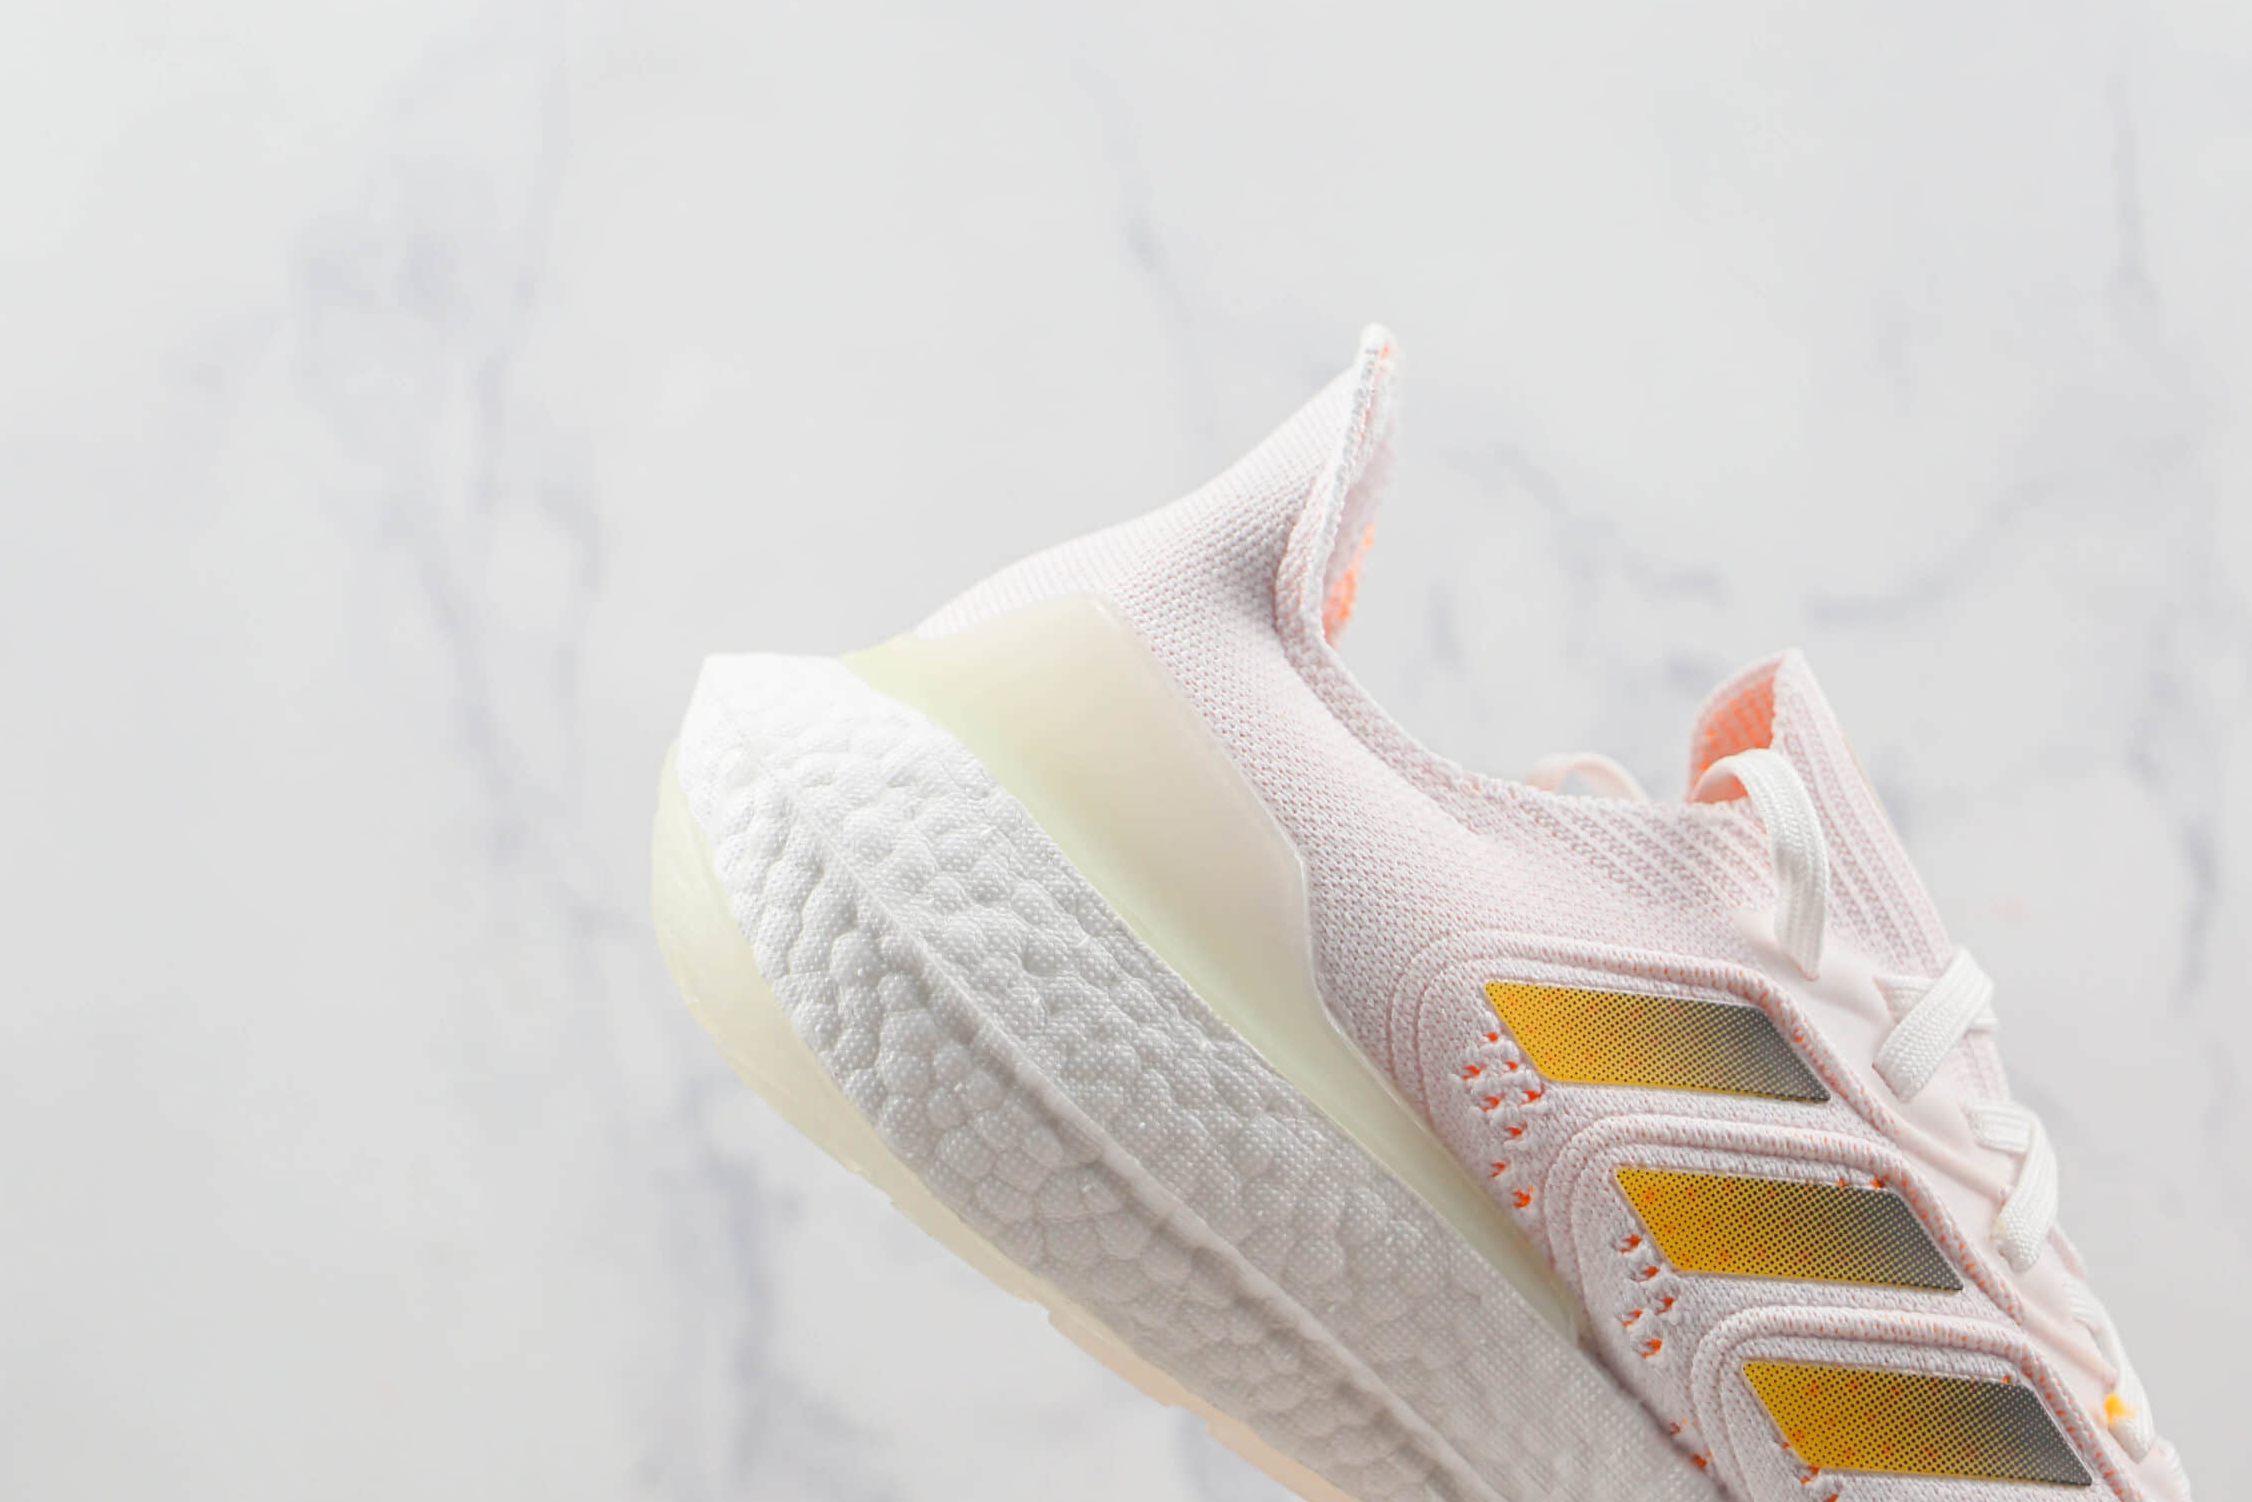 Adidas UltraBoost 22 Heat.RDY 'White Flash Orange' GZ0129 - Boost Your Performance Today